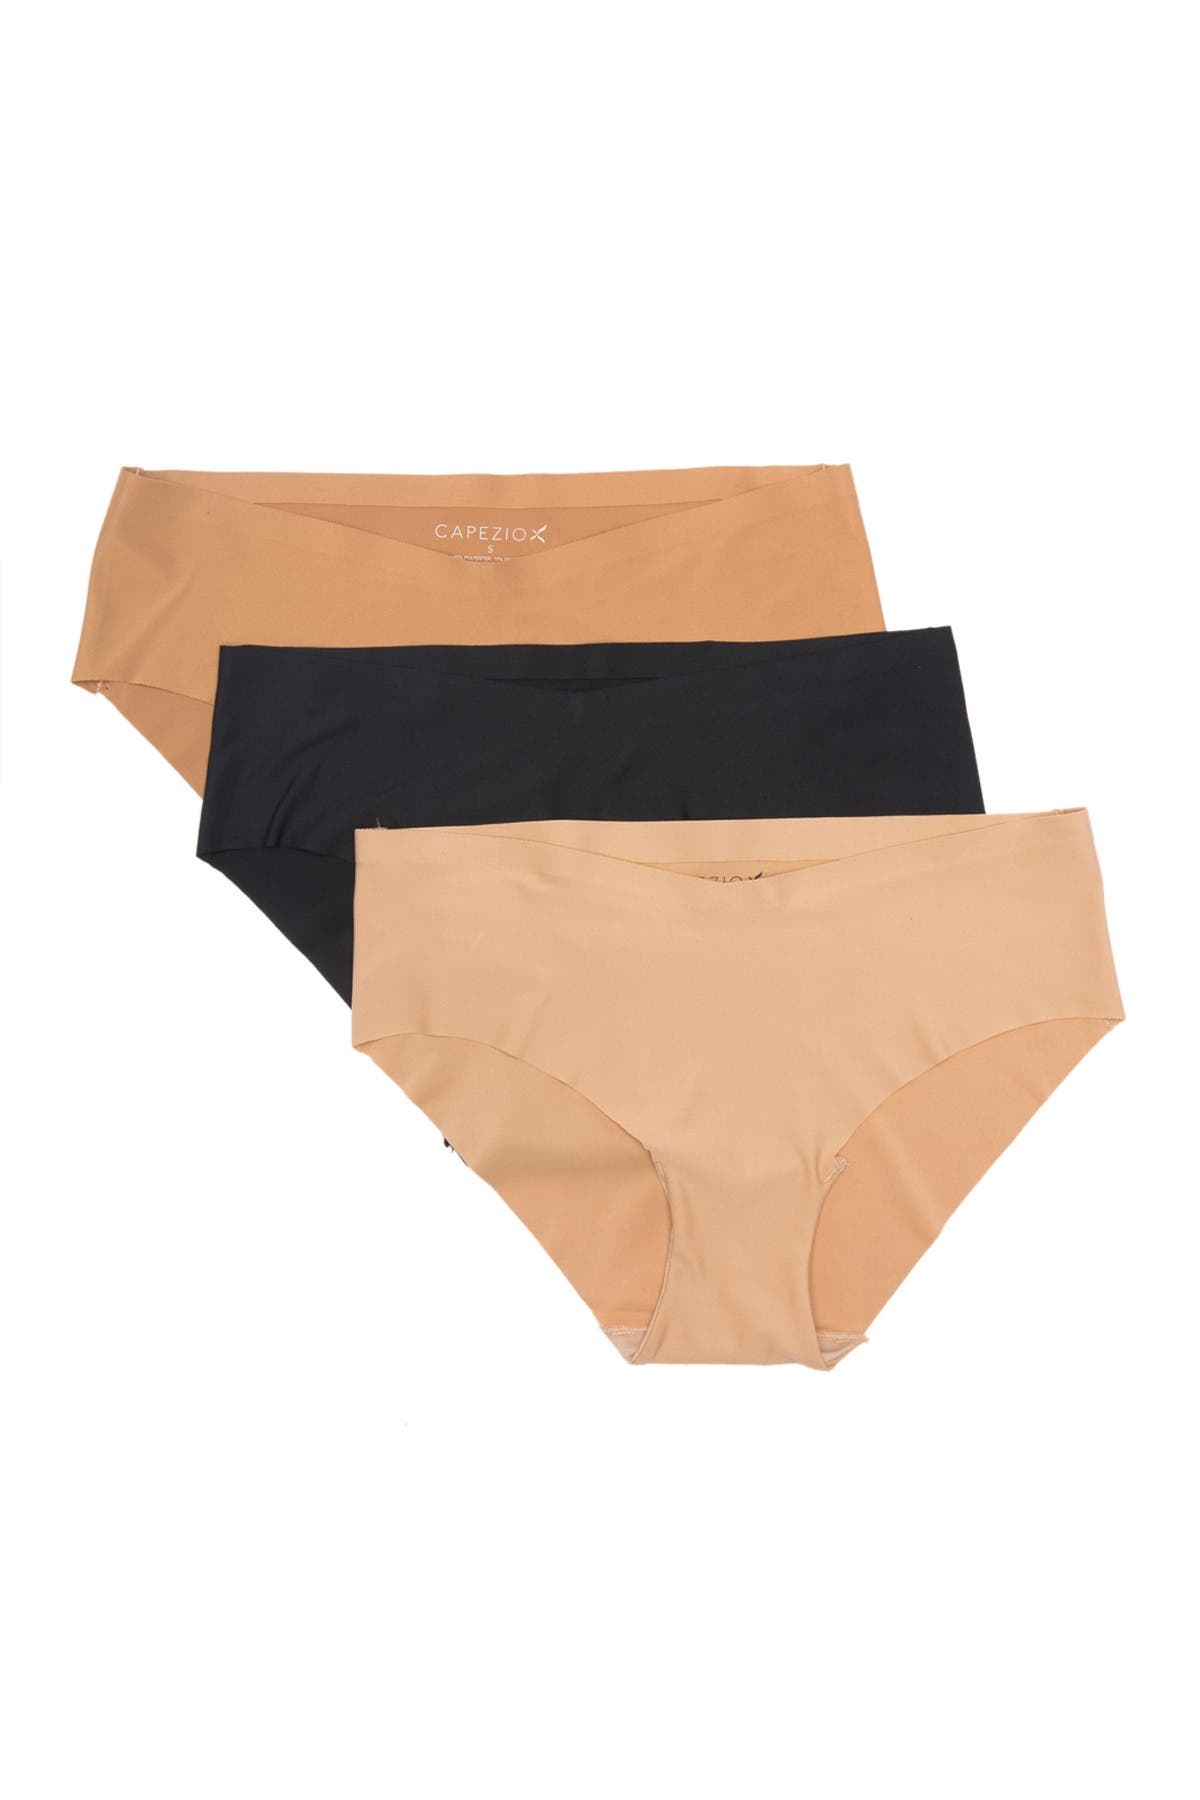 Studio By Capezio Seamless Hipster Panties In Black/ Porcelain/ Caramel